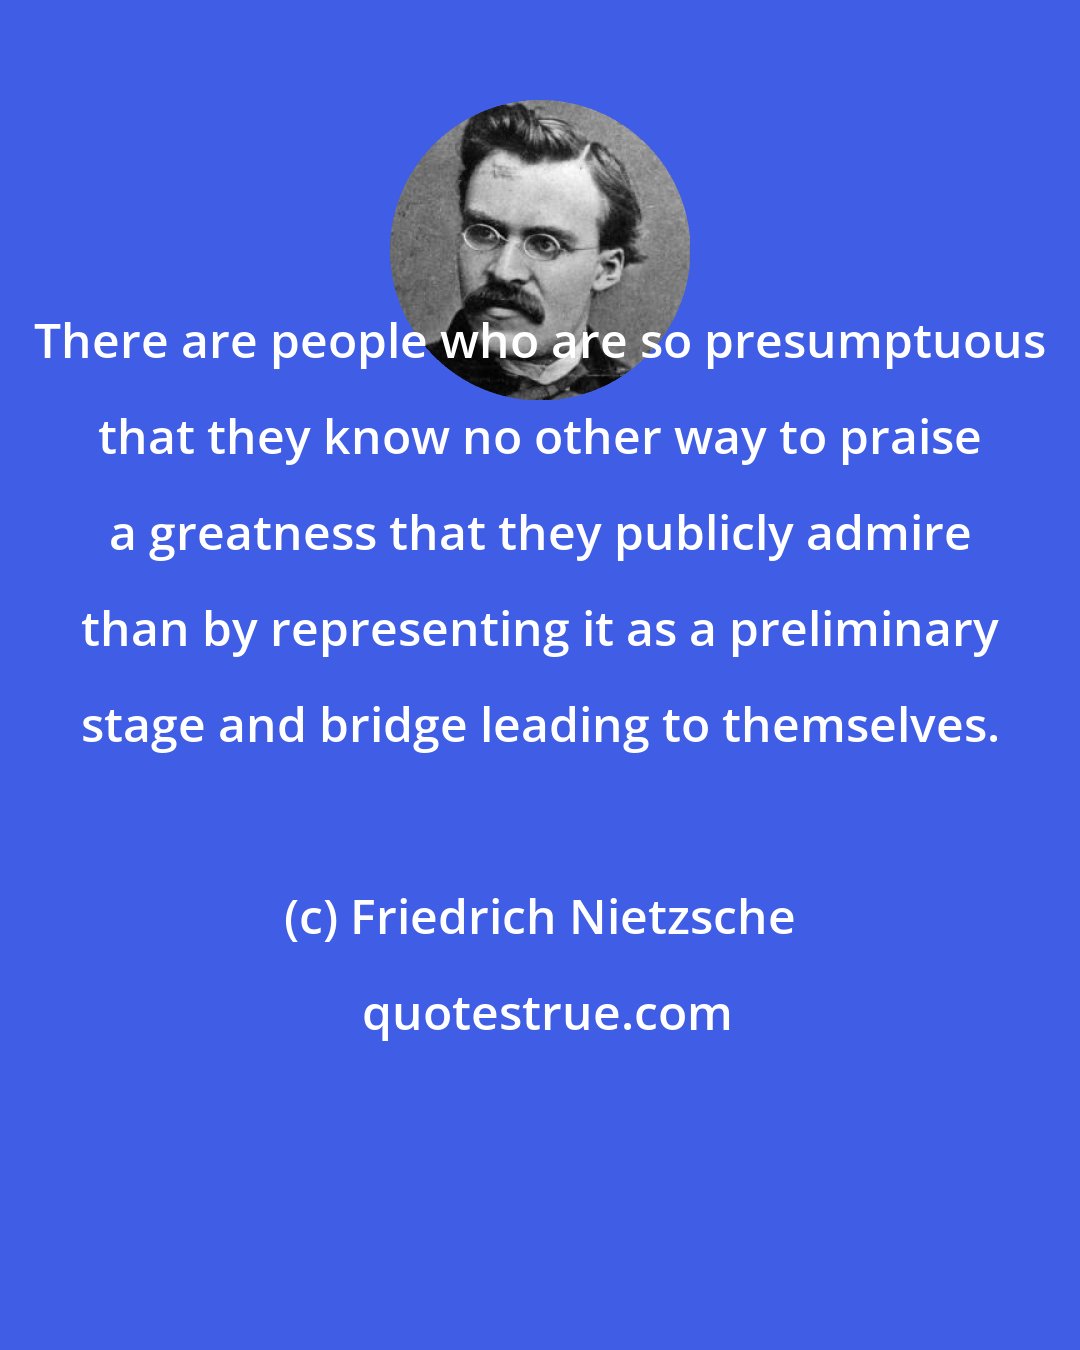 Friedrich Nietzsche: There are people who are so presumptuous that they know no other way to praise a greatness that they publicly admire than by representing it as a preliminary stage and bridge leading to themselves.